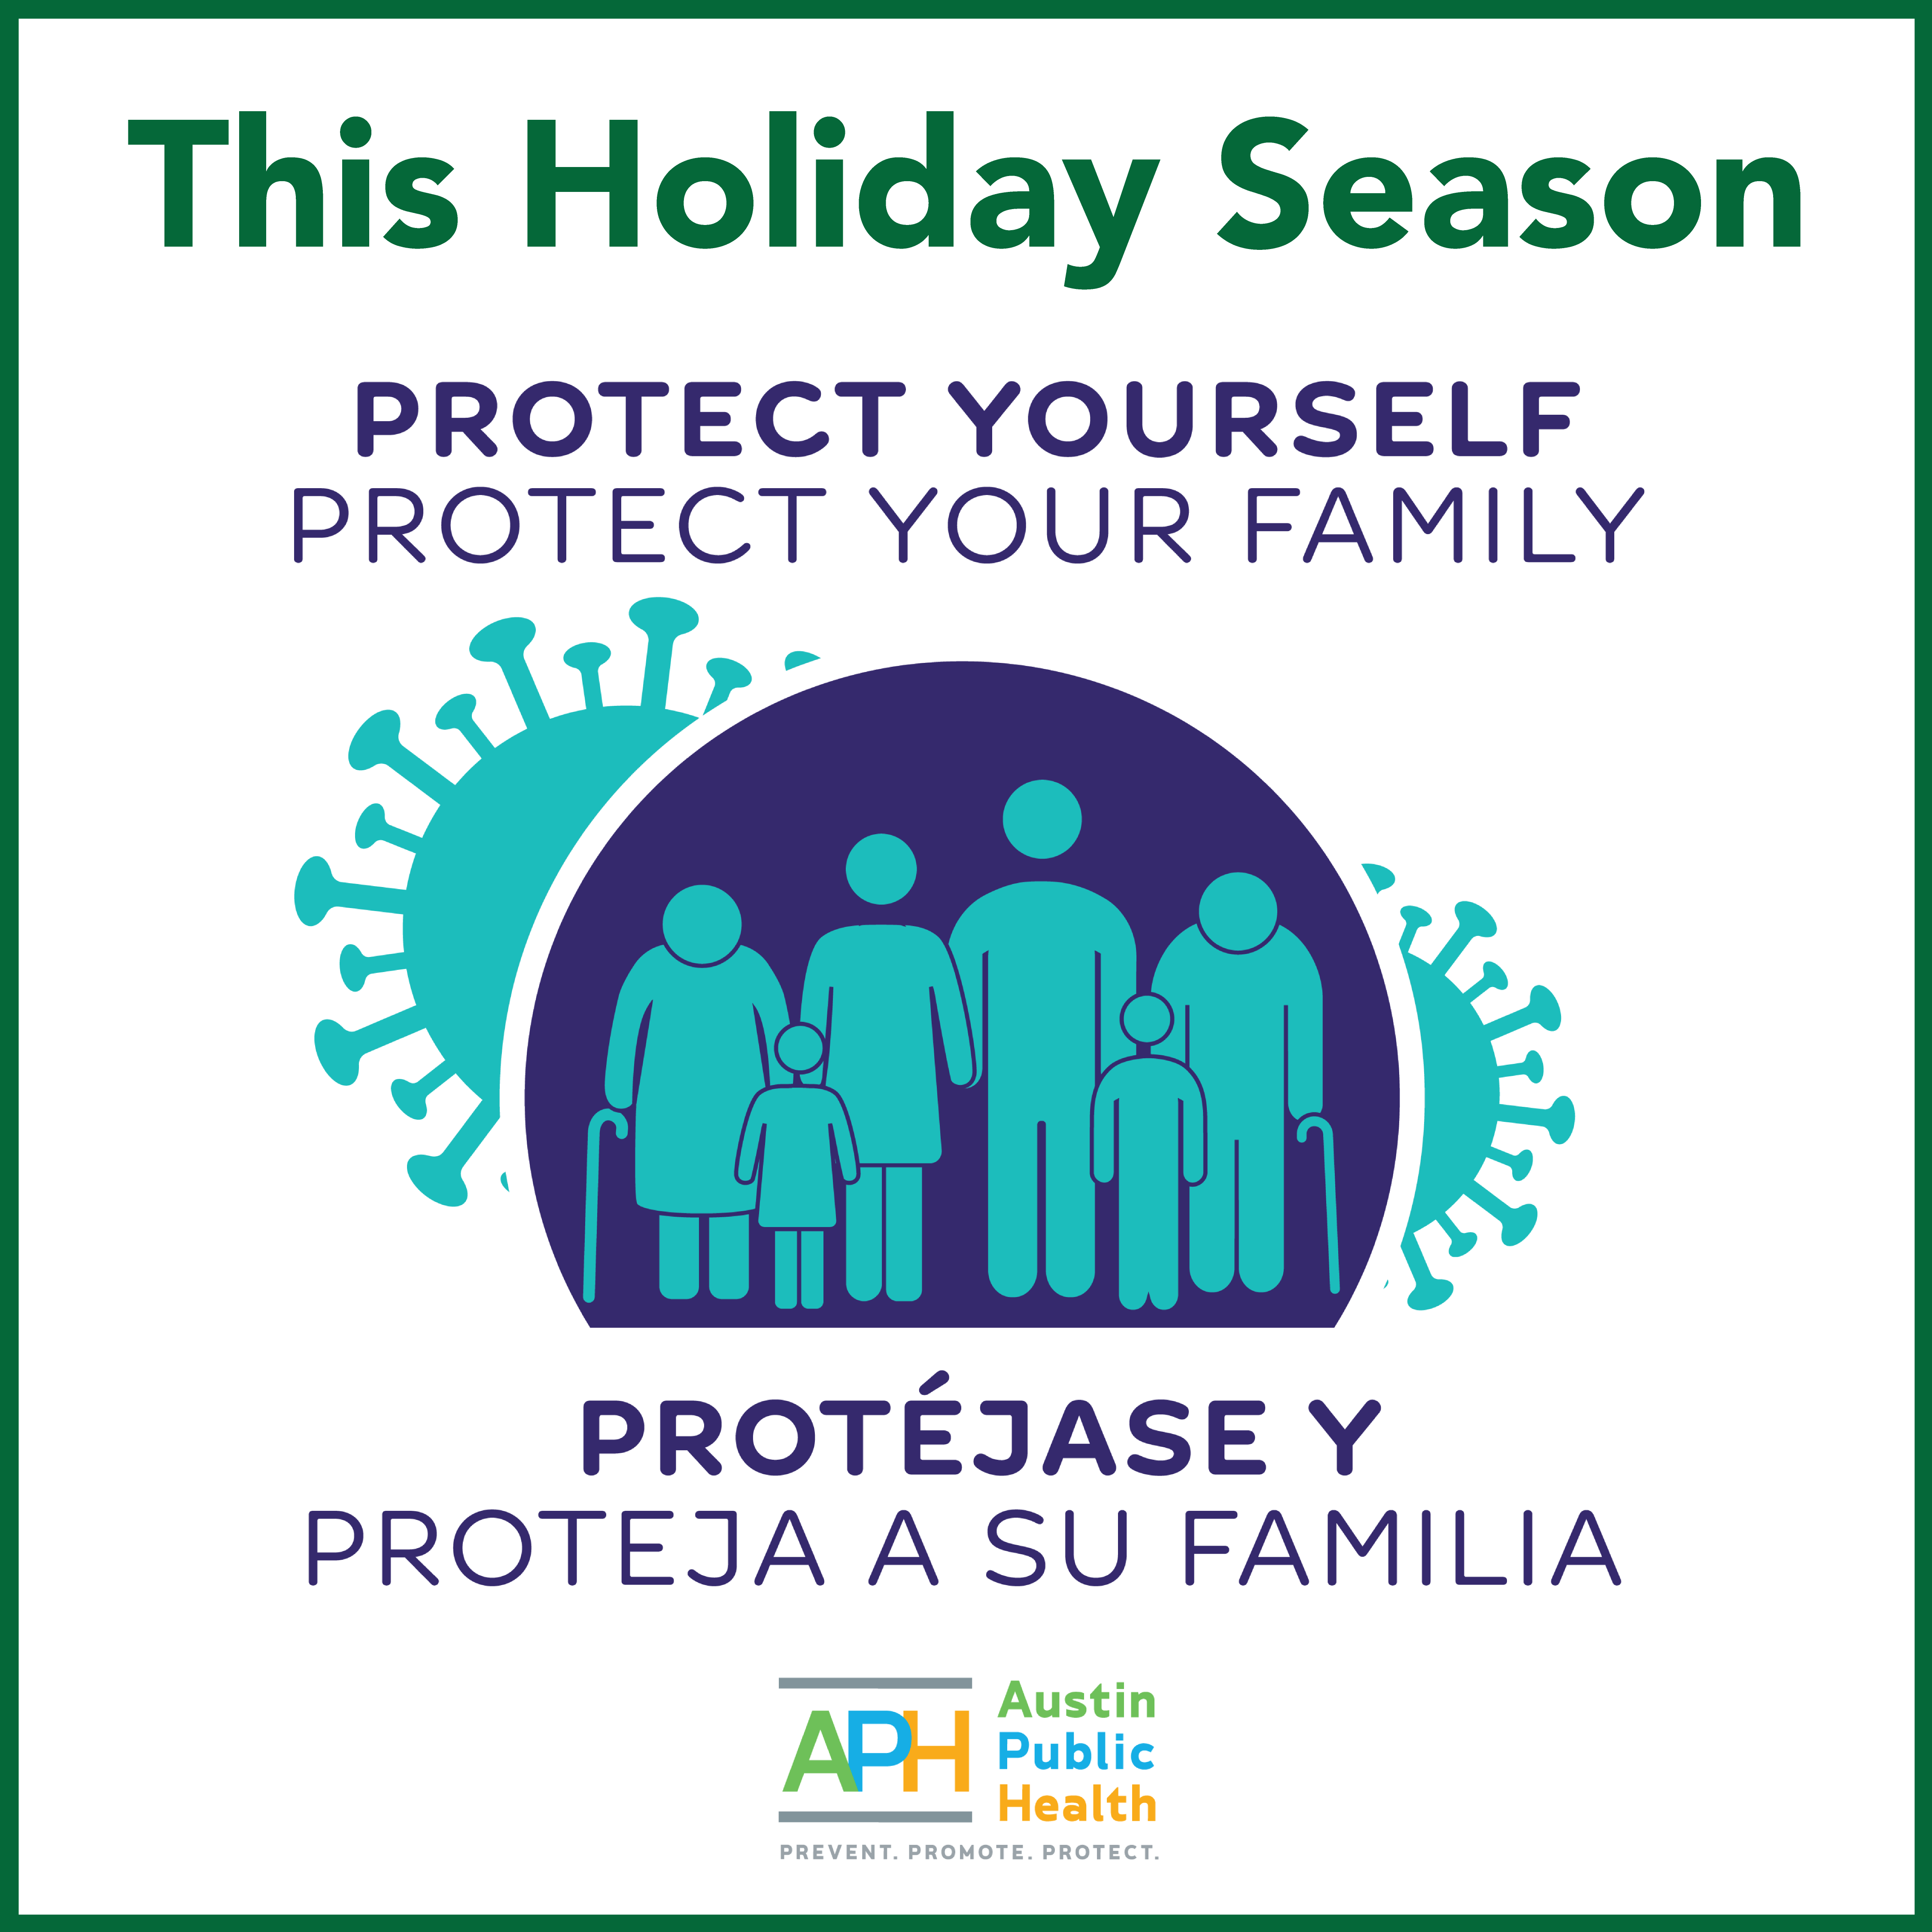 "This Holiday Season, Protect Yourself and Protect Your Family. Protéjase y Proteja a su familia."